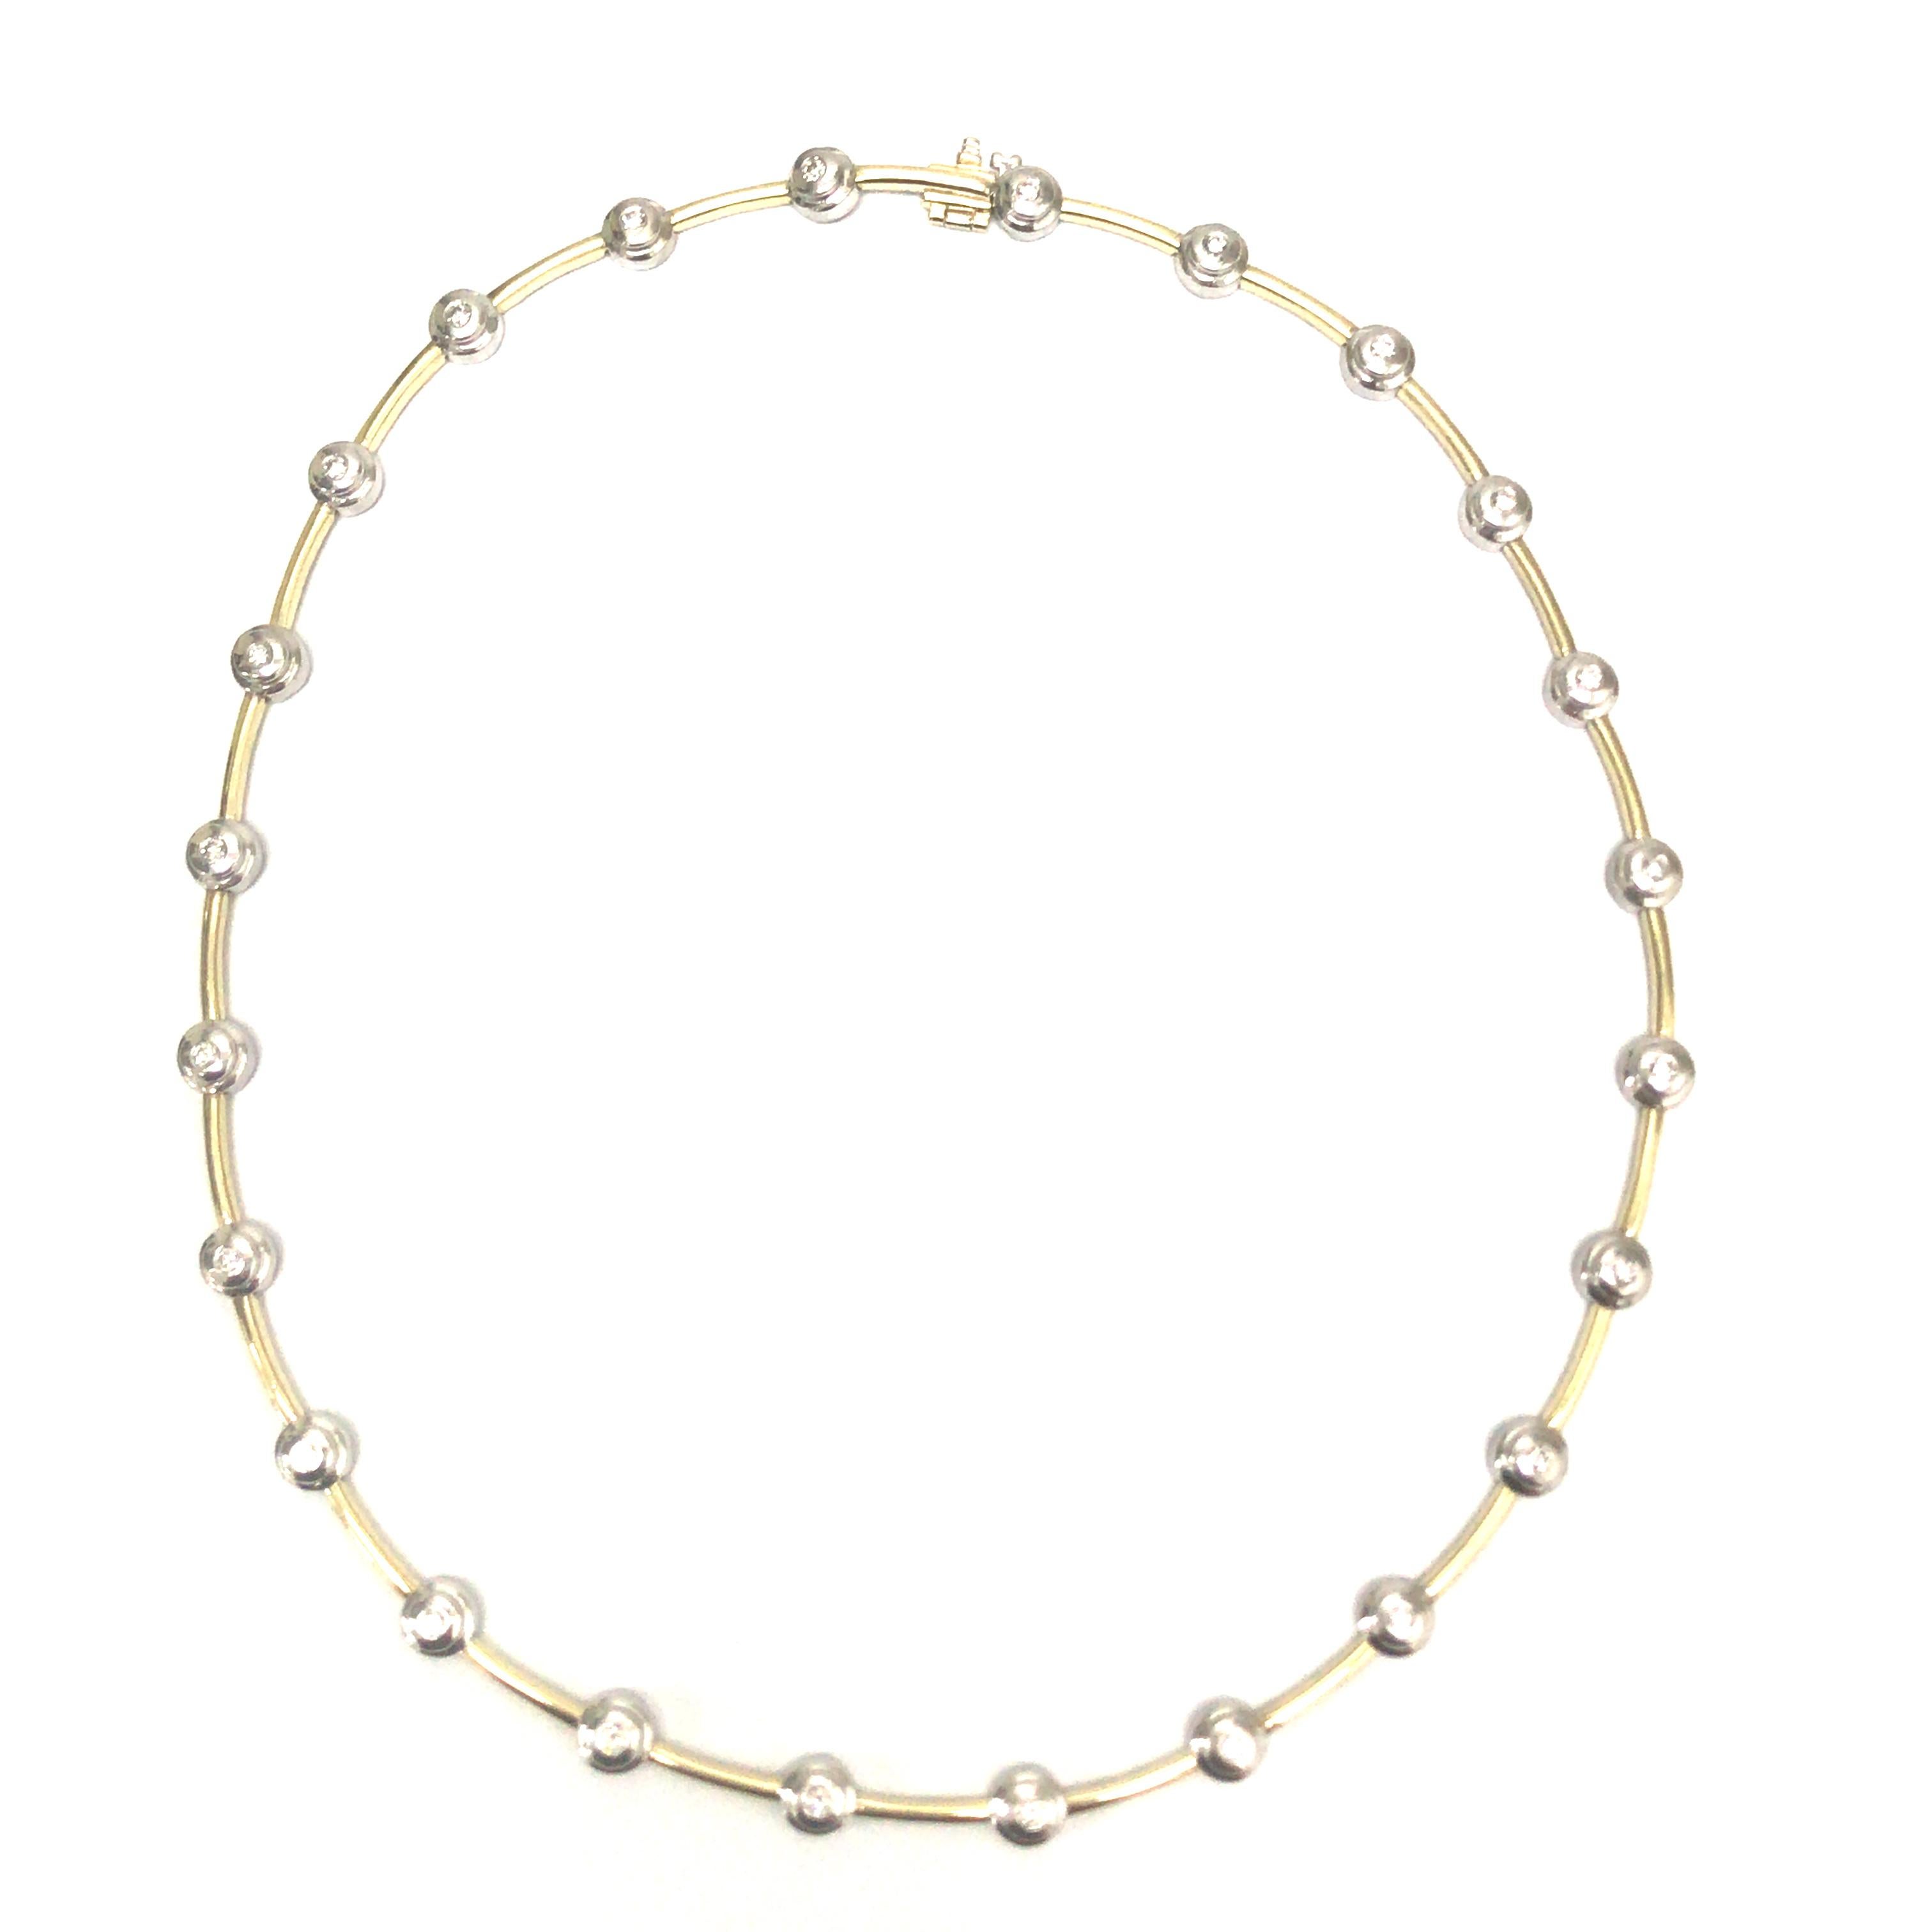 Diamond Bezel Link Necklace in 14K Two-Tone Gold.  (23) Round Brilliant Cut Diamonds weighing 1.28 carat total weight, G-I in color and VS-SI in clarity are expertly Bezel set alternating with Gold links.  The Necklace measures 16 inch in length and